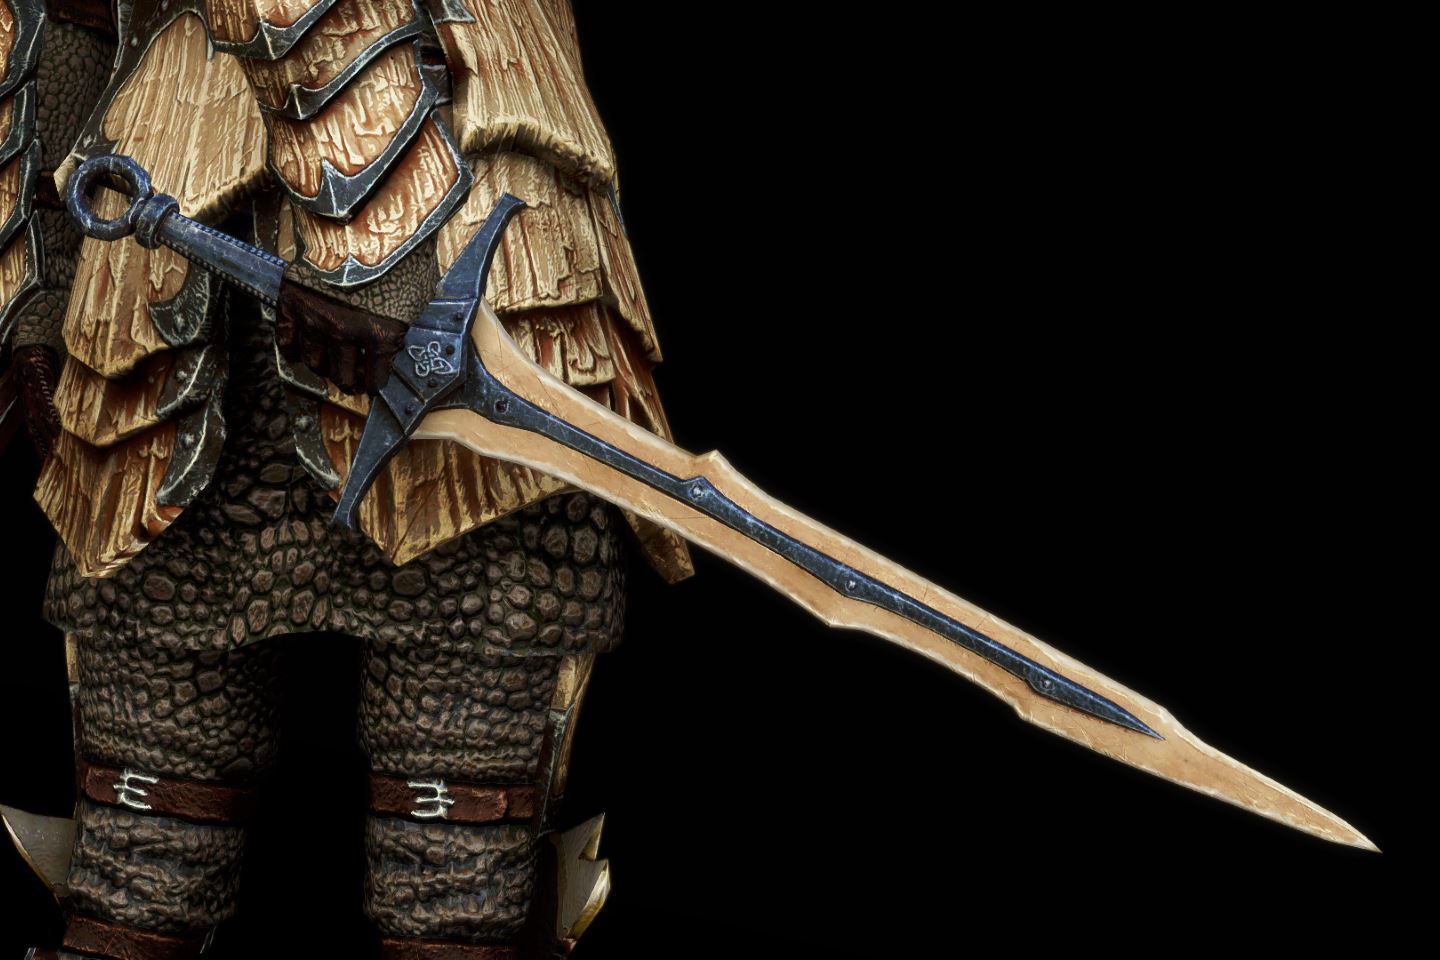 Skyrim Se Le Mod紹介 Frankly Hd Dragonbone And Dragonscale Armor And Weapons その１ 武器 紹介